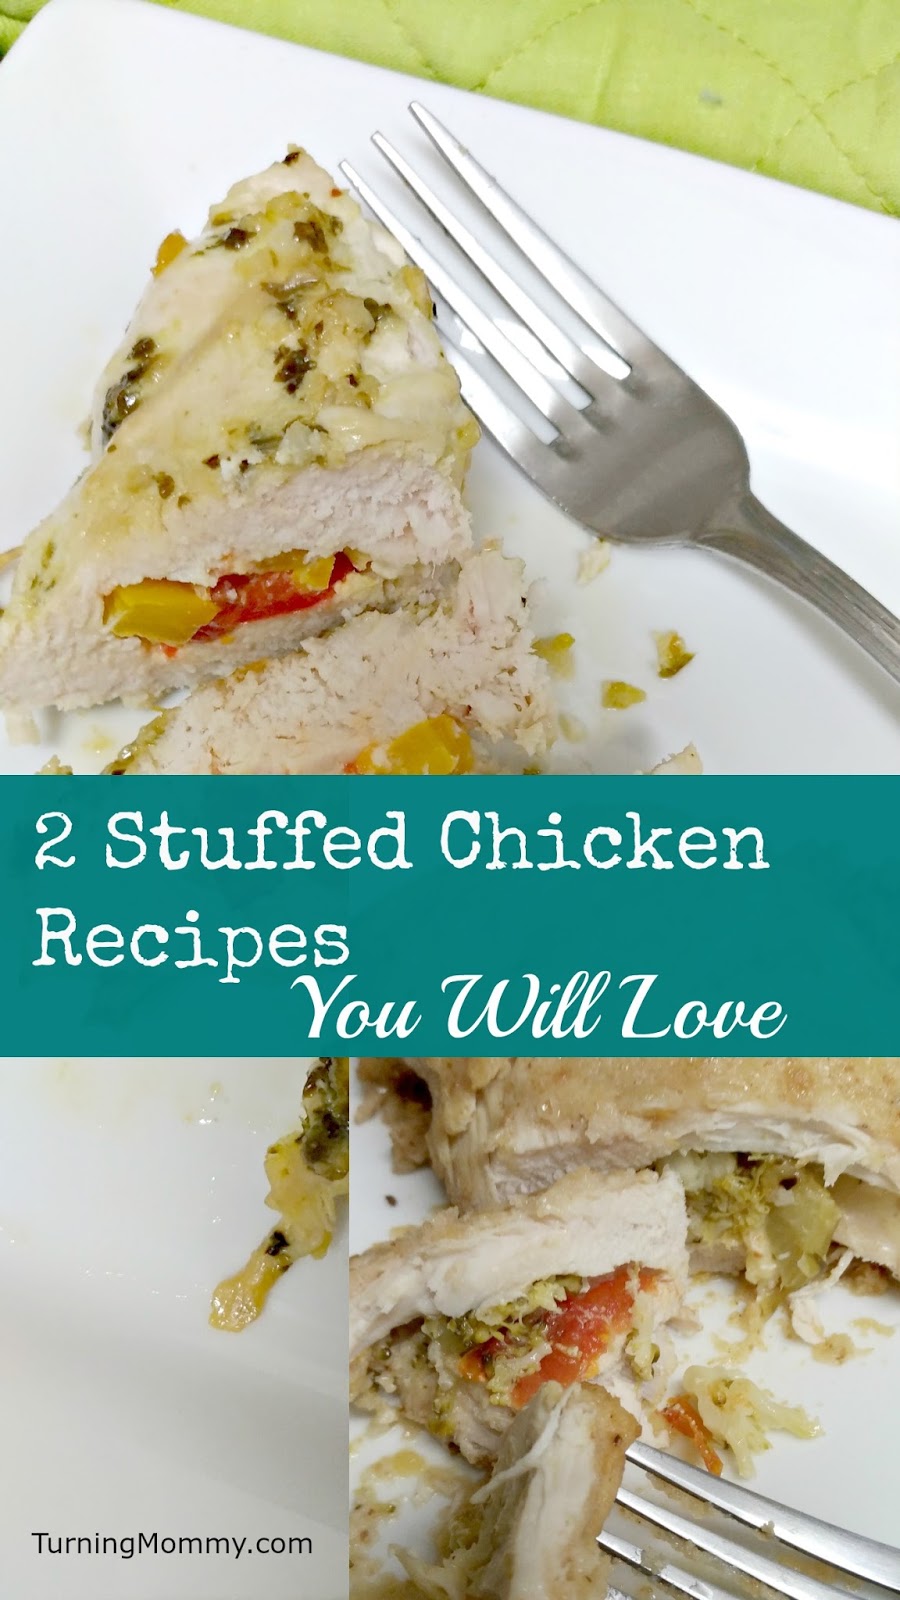 Turning Mommy: 2 Stuffed Chicken Recipes You Will Love